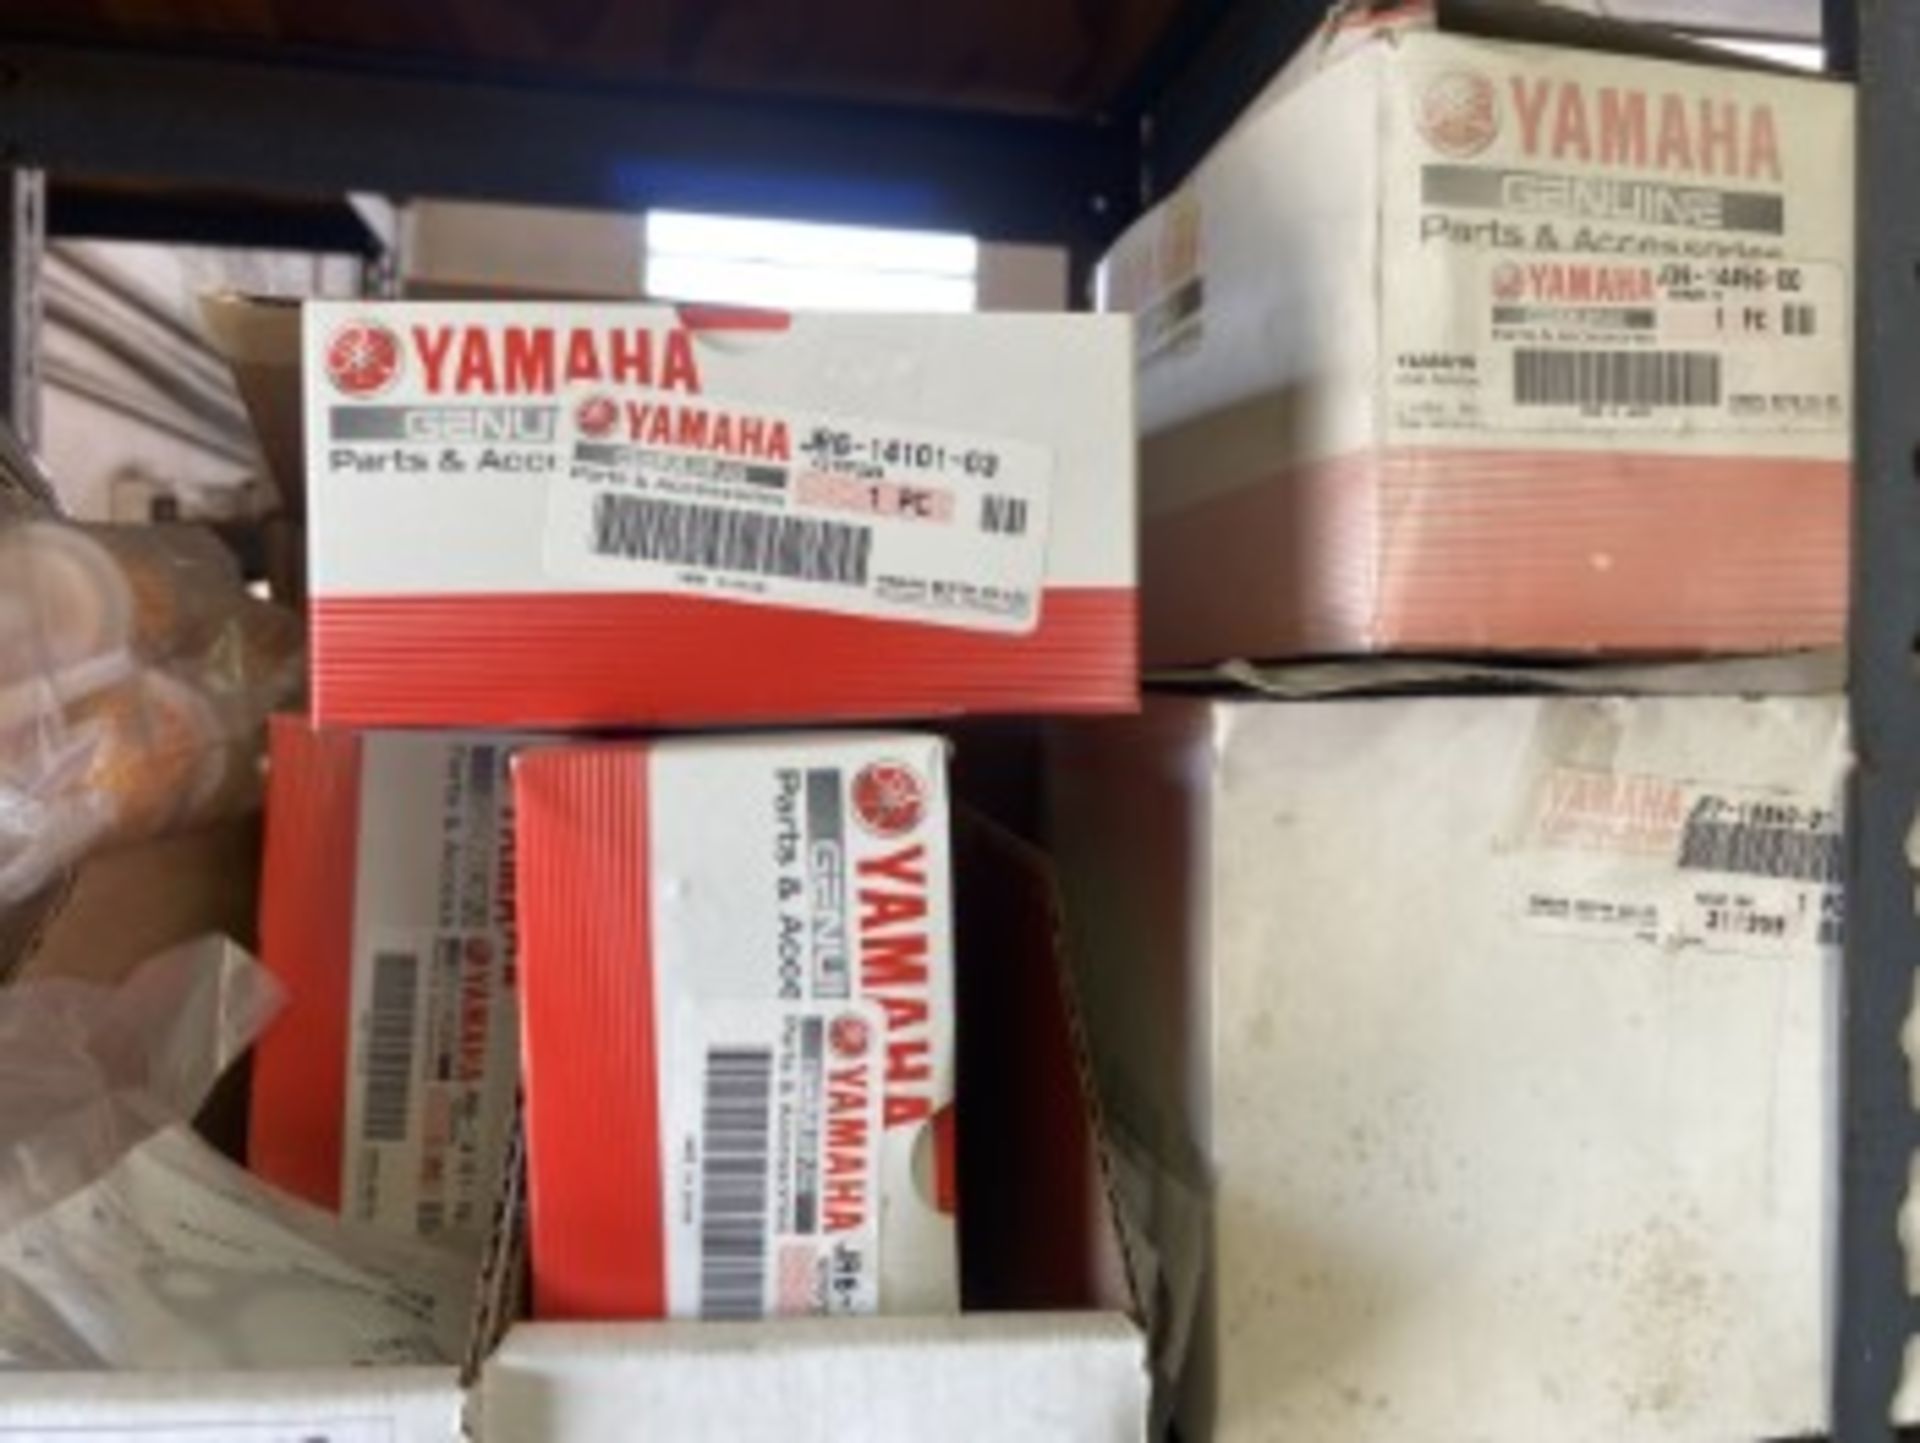 ASSORTED YAMAHA PARTS - TUNE UP PARTS, CARBS, GENERATOR PARTS, ETC - Image 4 of 6